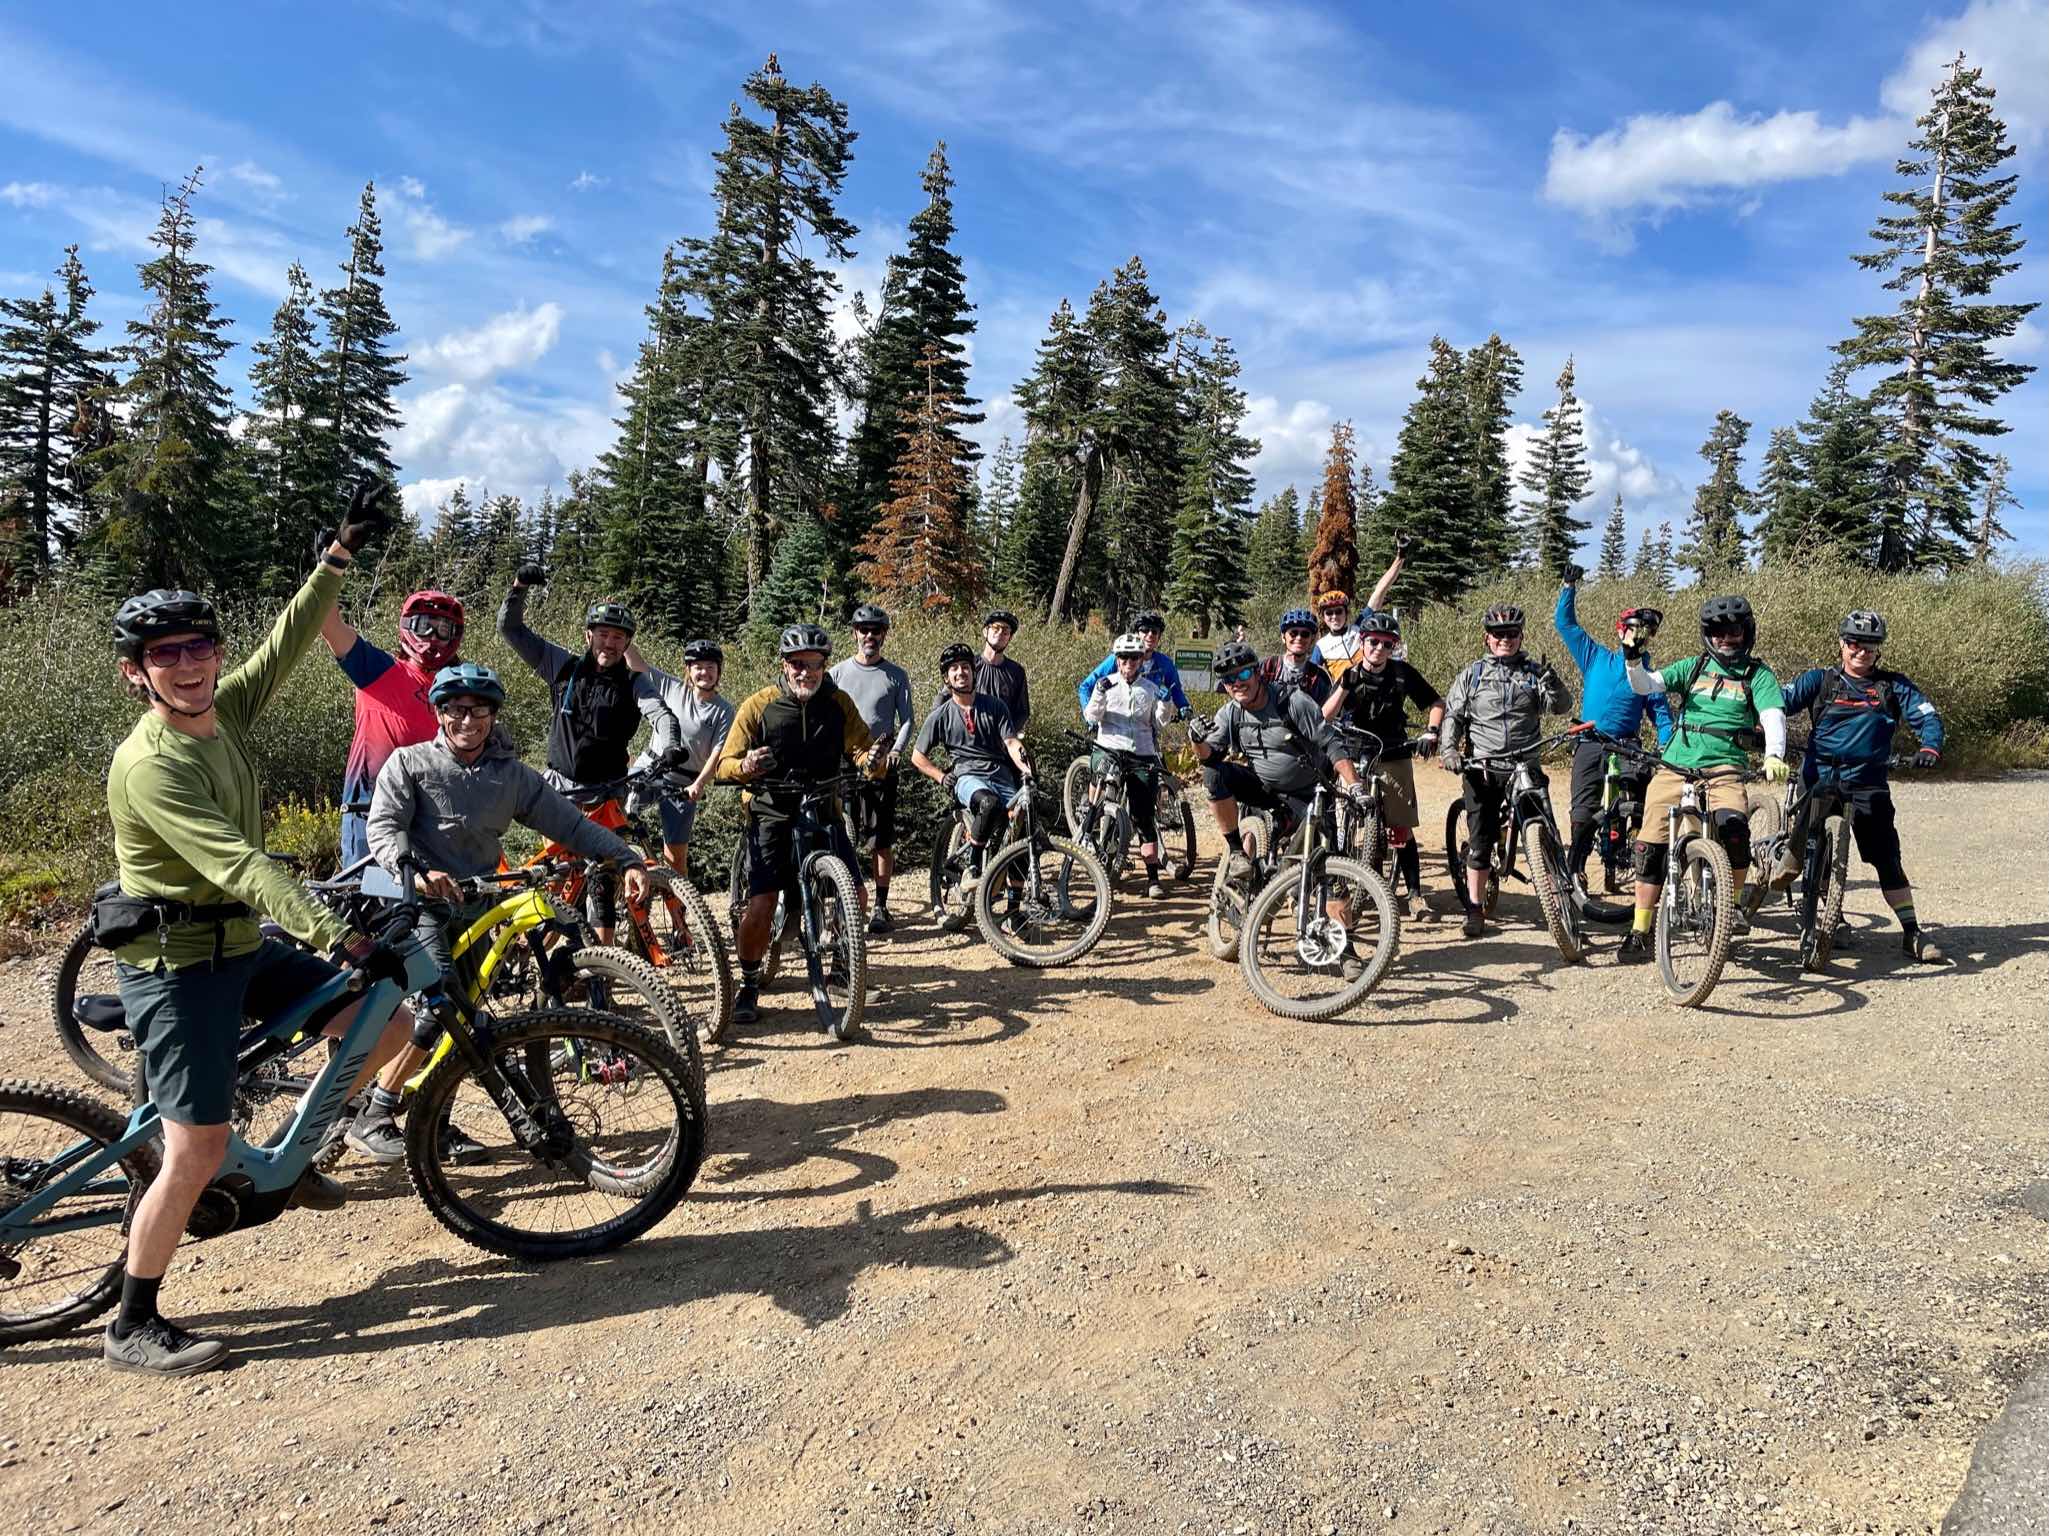 Group of mountain bikers posing before a ride in Orange County, California